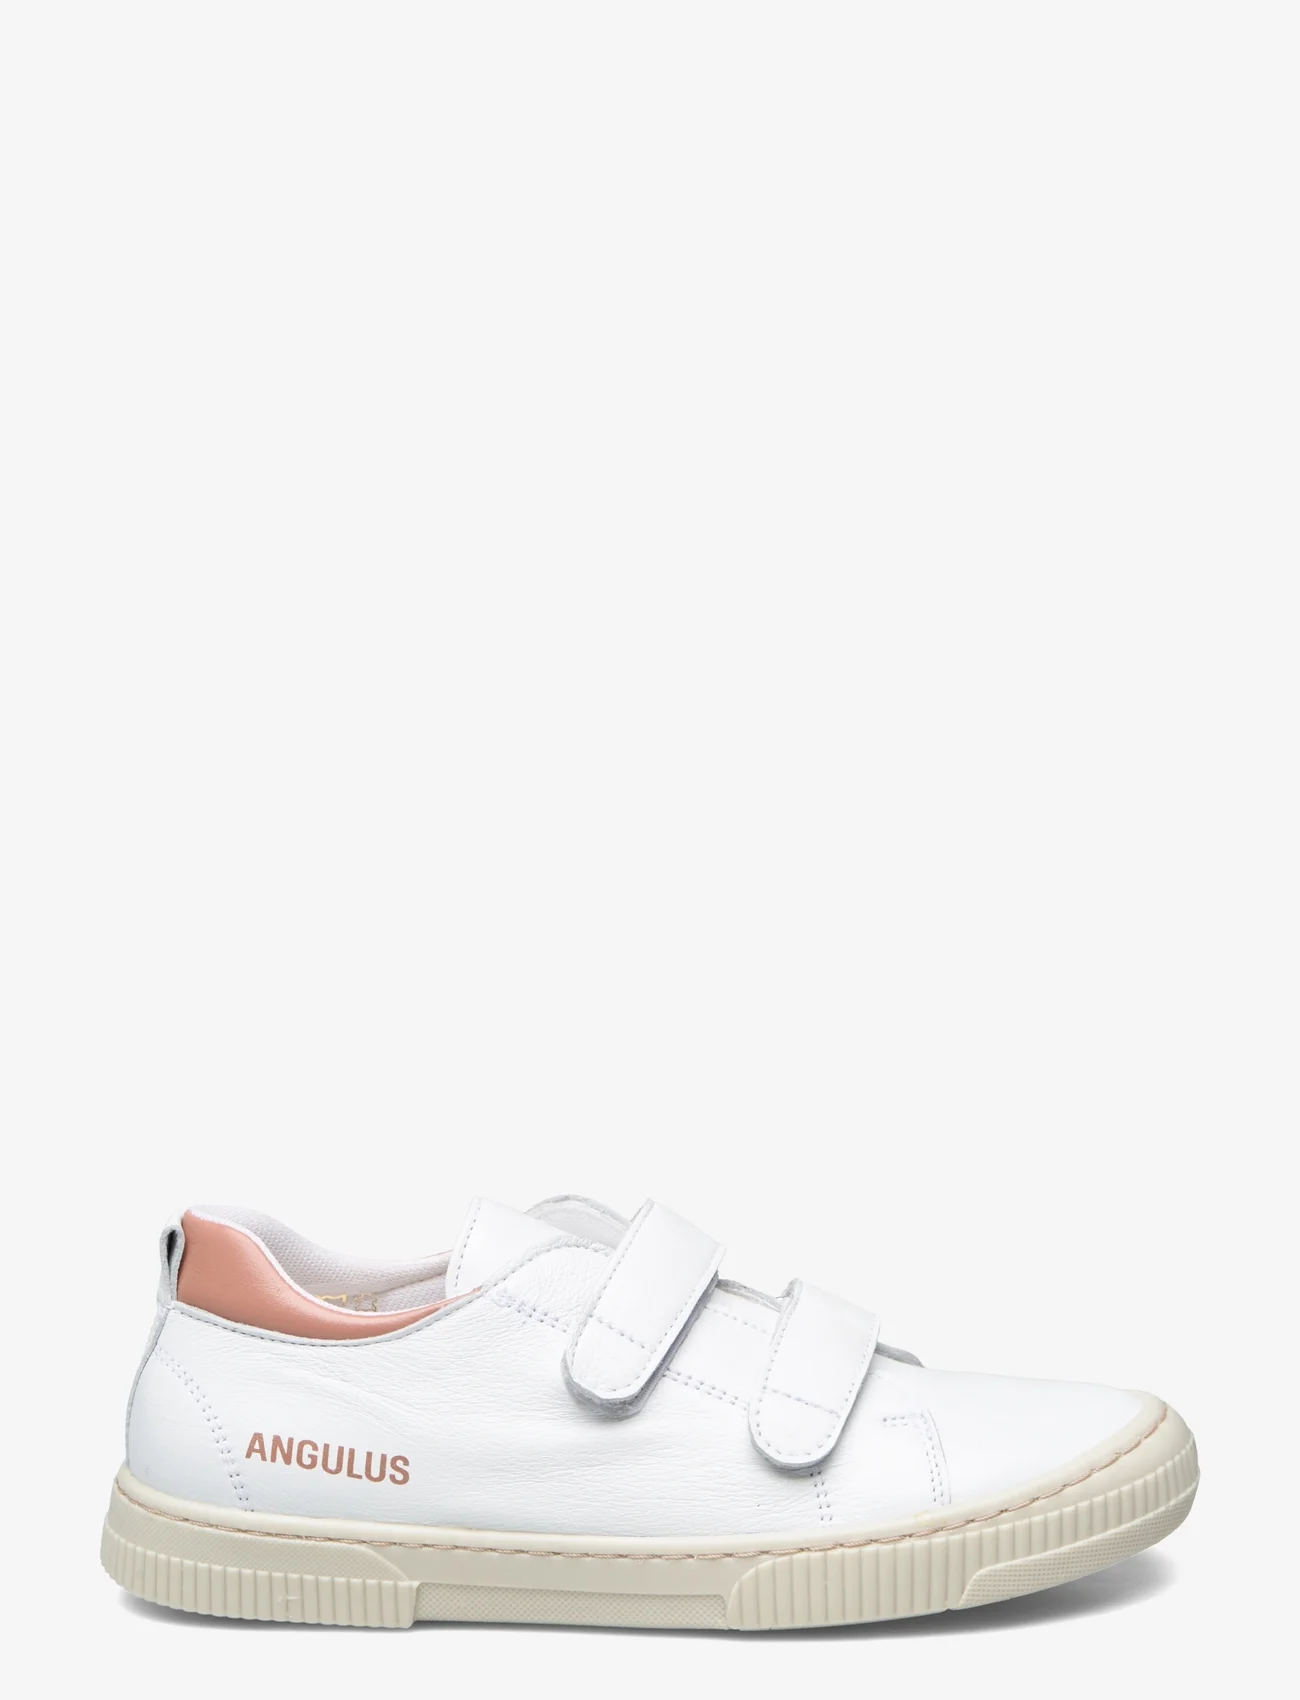 ANGULUS - Shoes - flat - with velcro - zomerkoopjes - 1521/1470 white/d.peach - 1